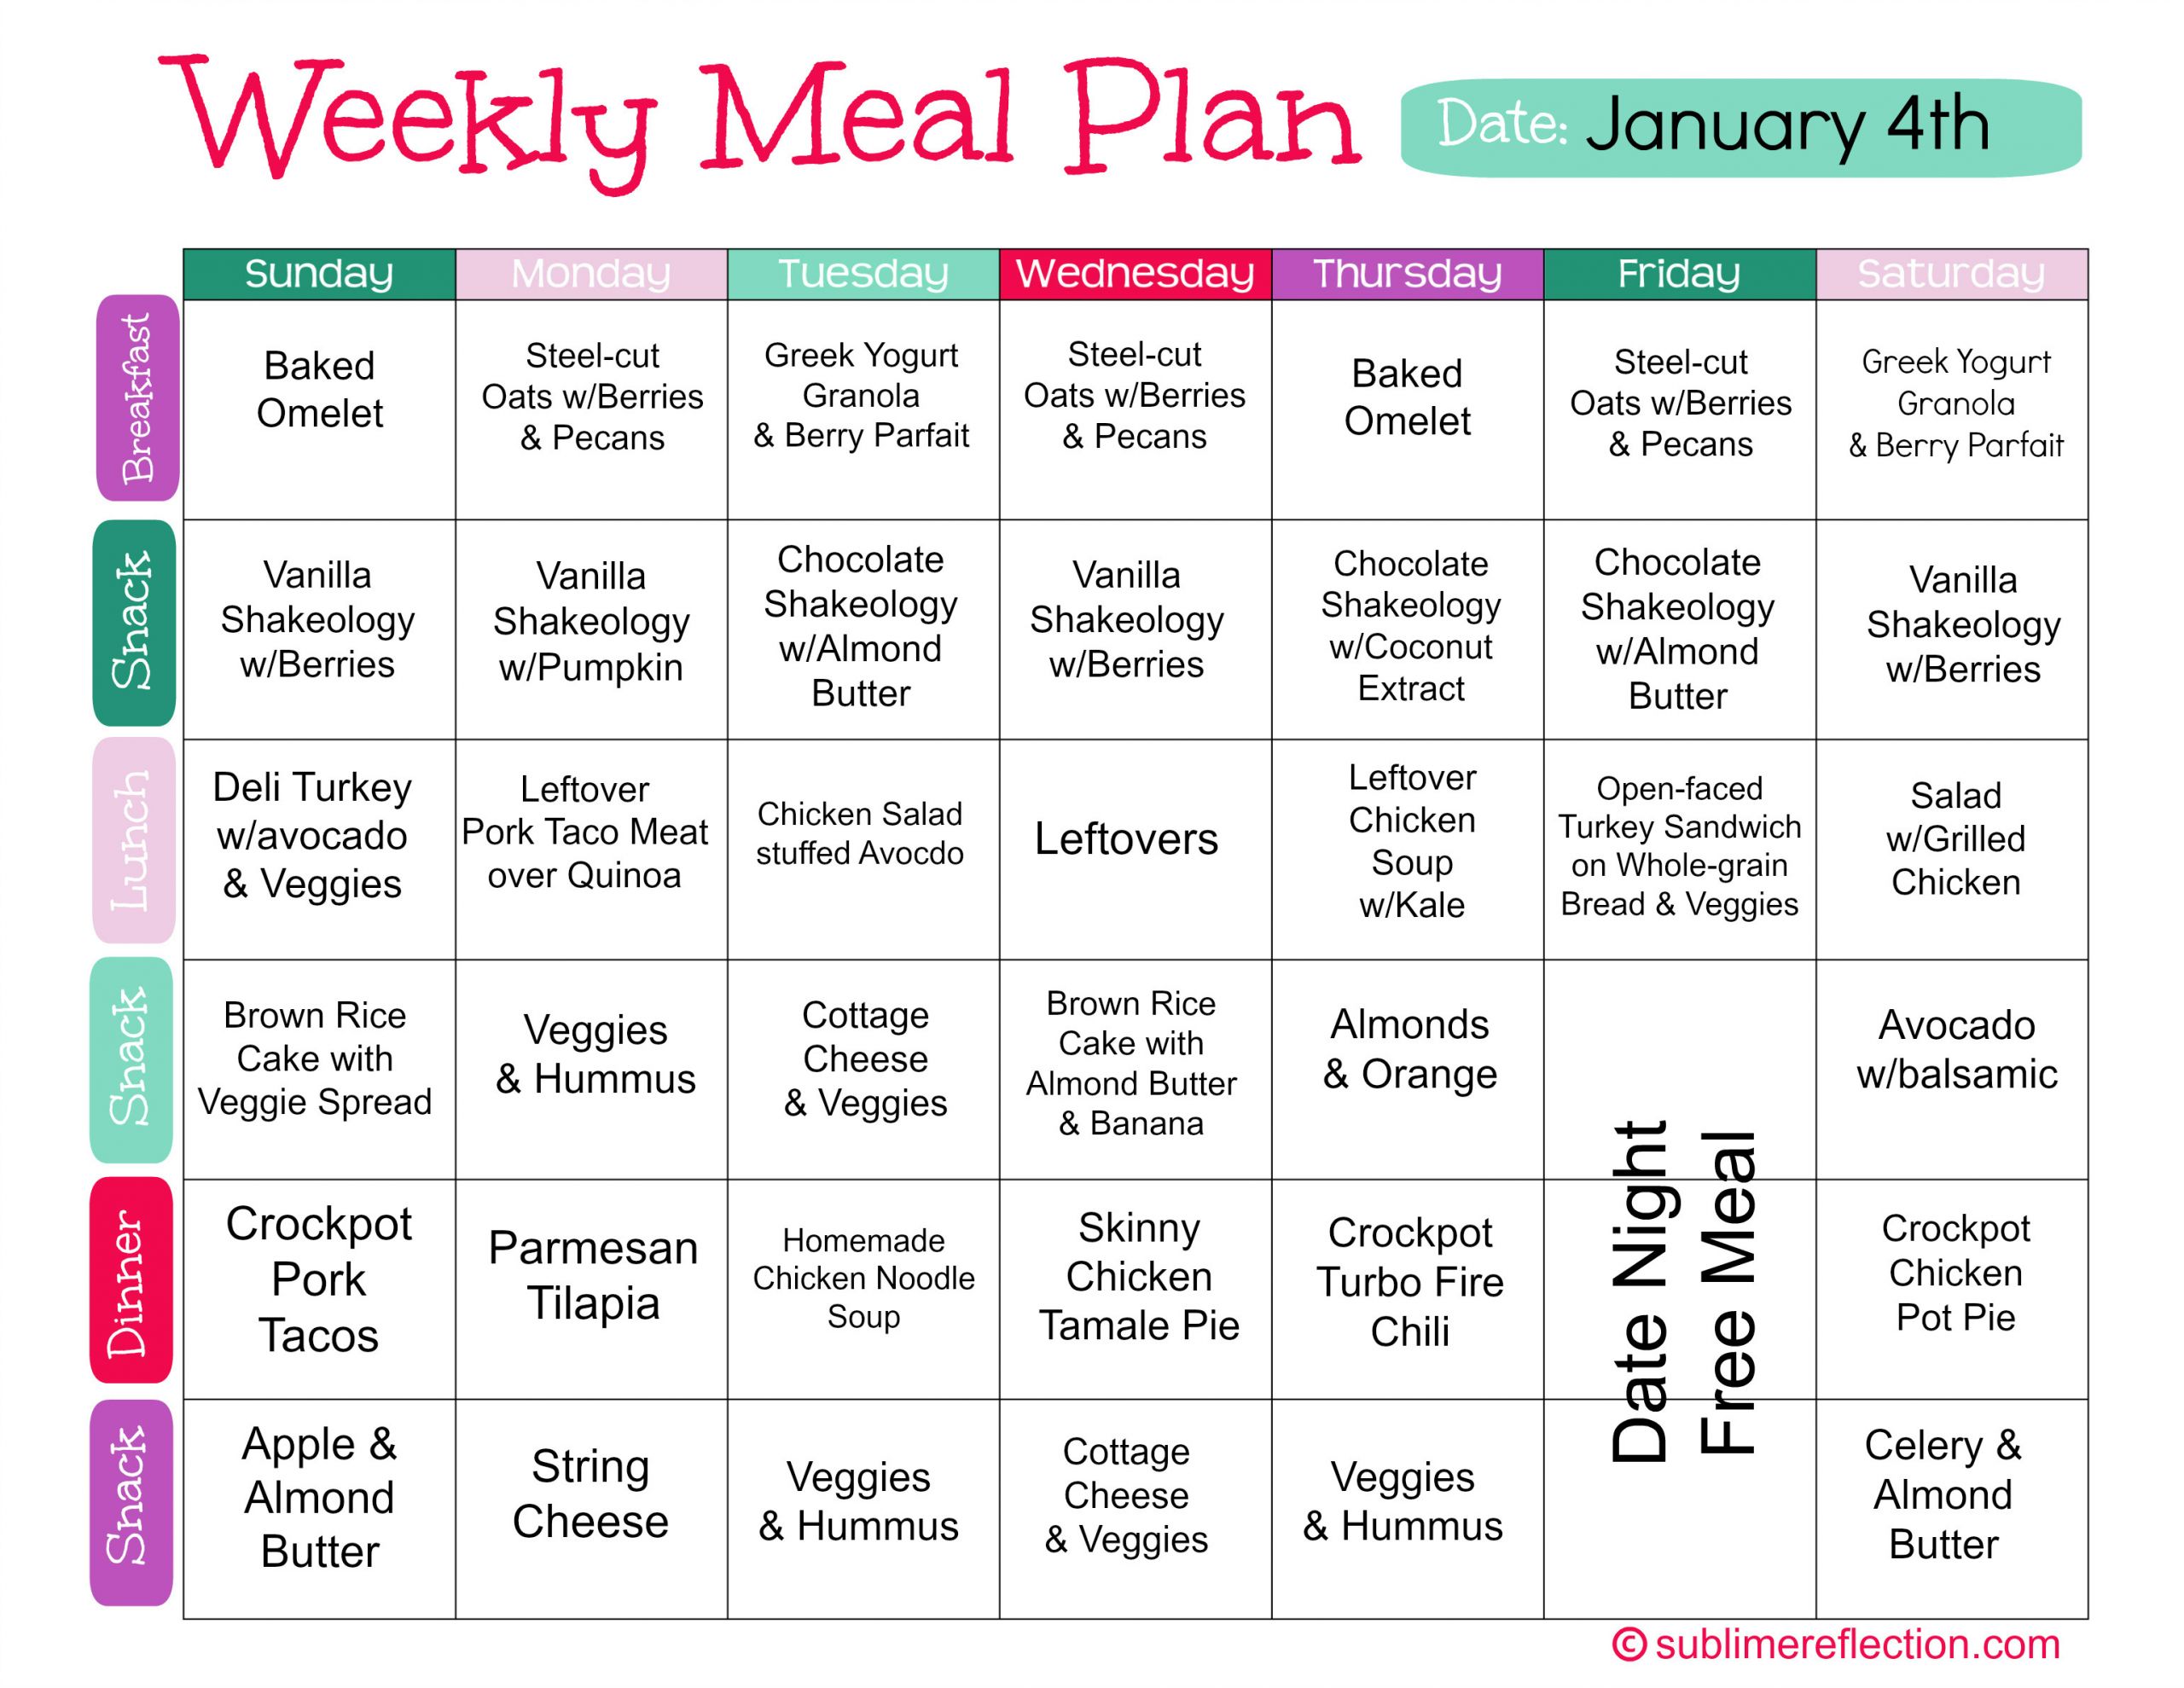 Clean Eating Diet Plan
 Transitioning Your Family to a Clean Eating Meal Plan